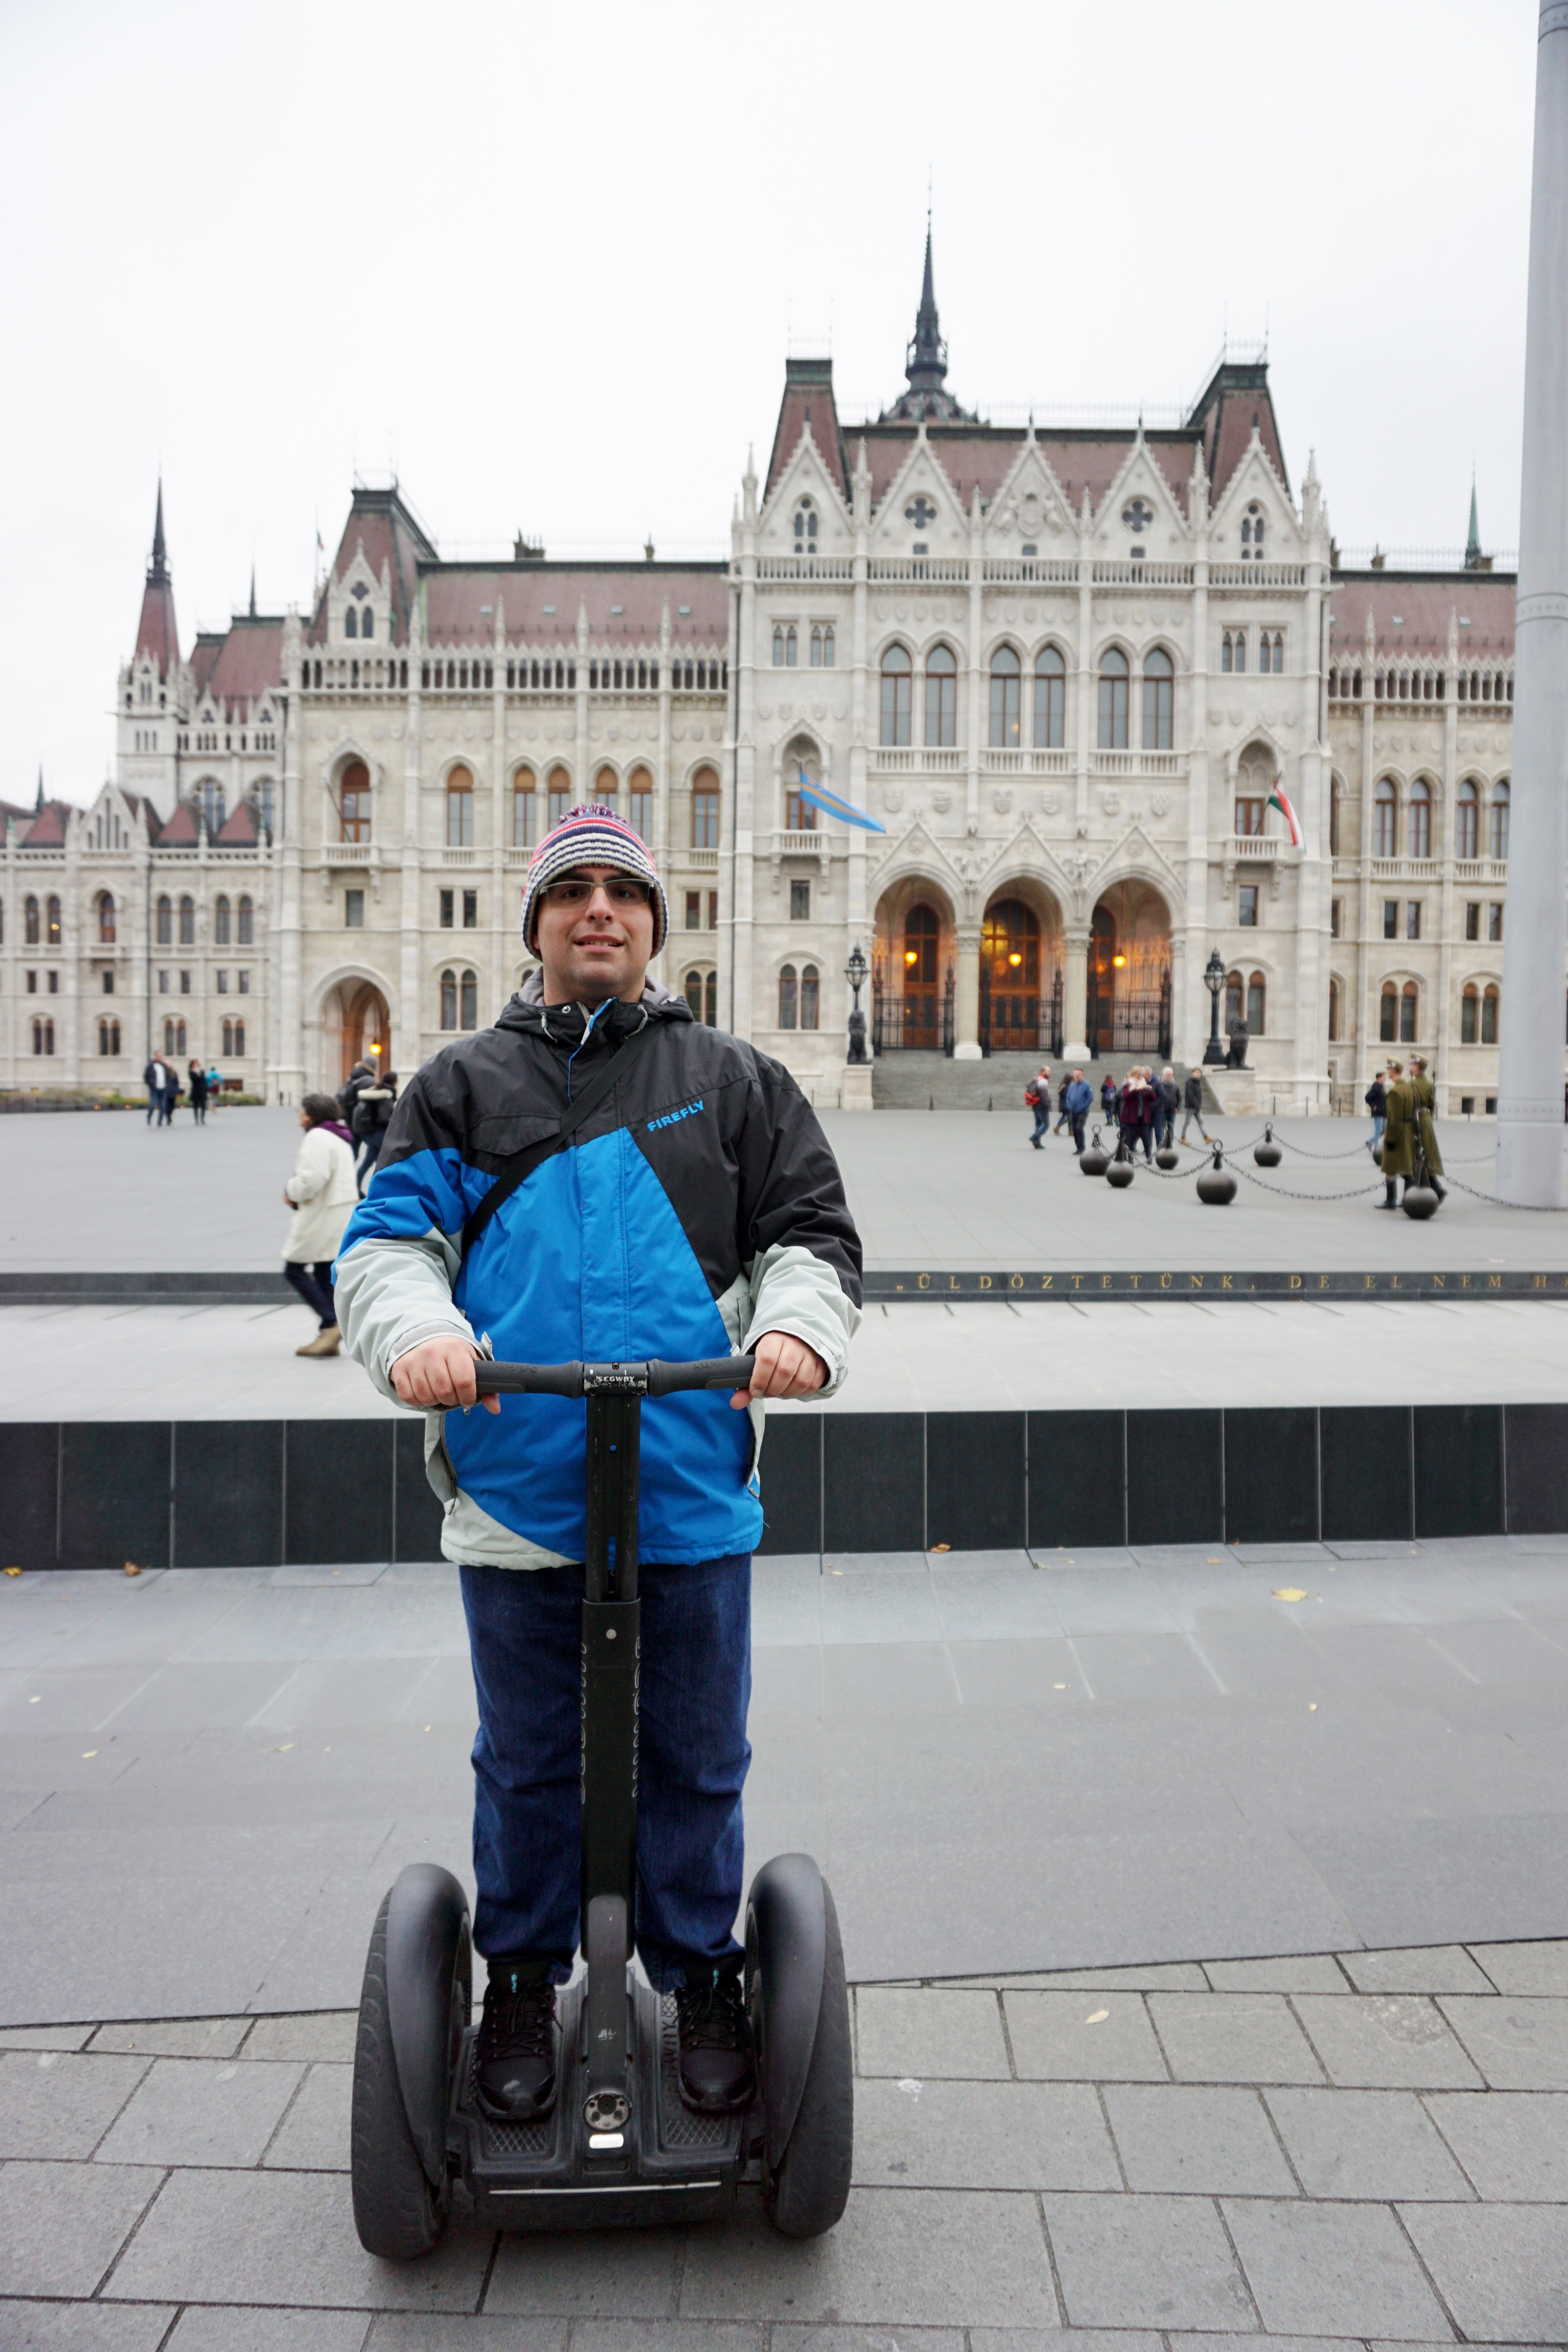 Adventurous travelers can also discover this city by Segway.